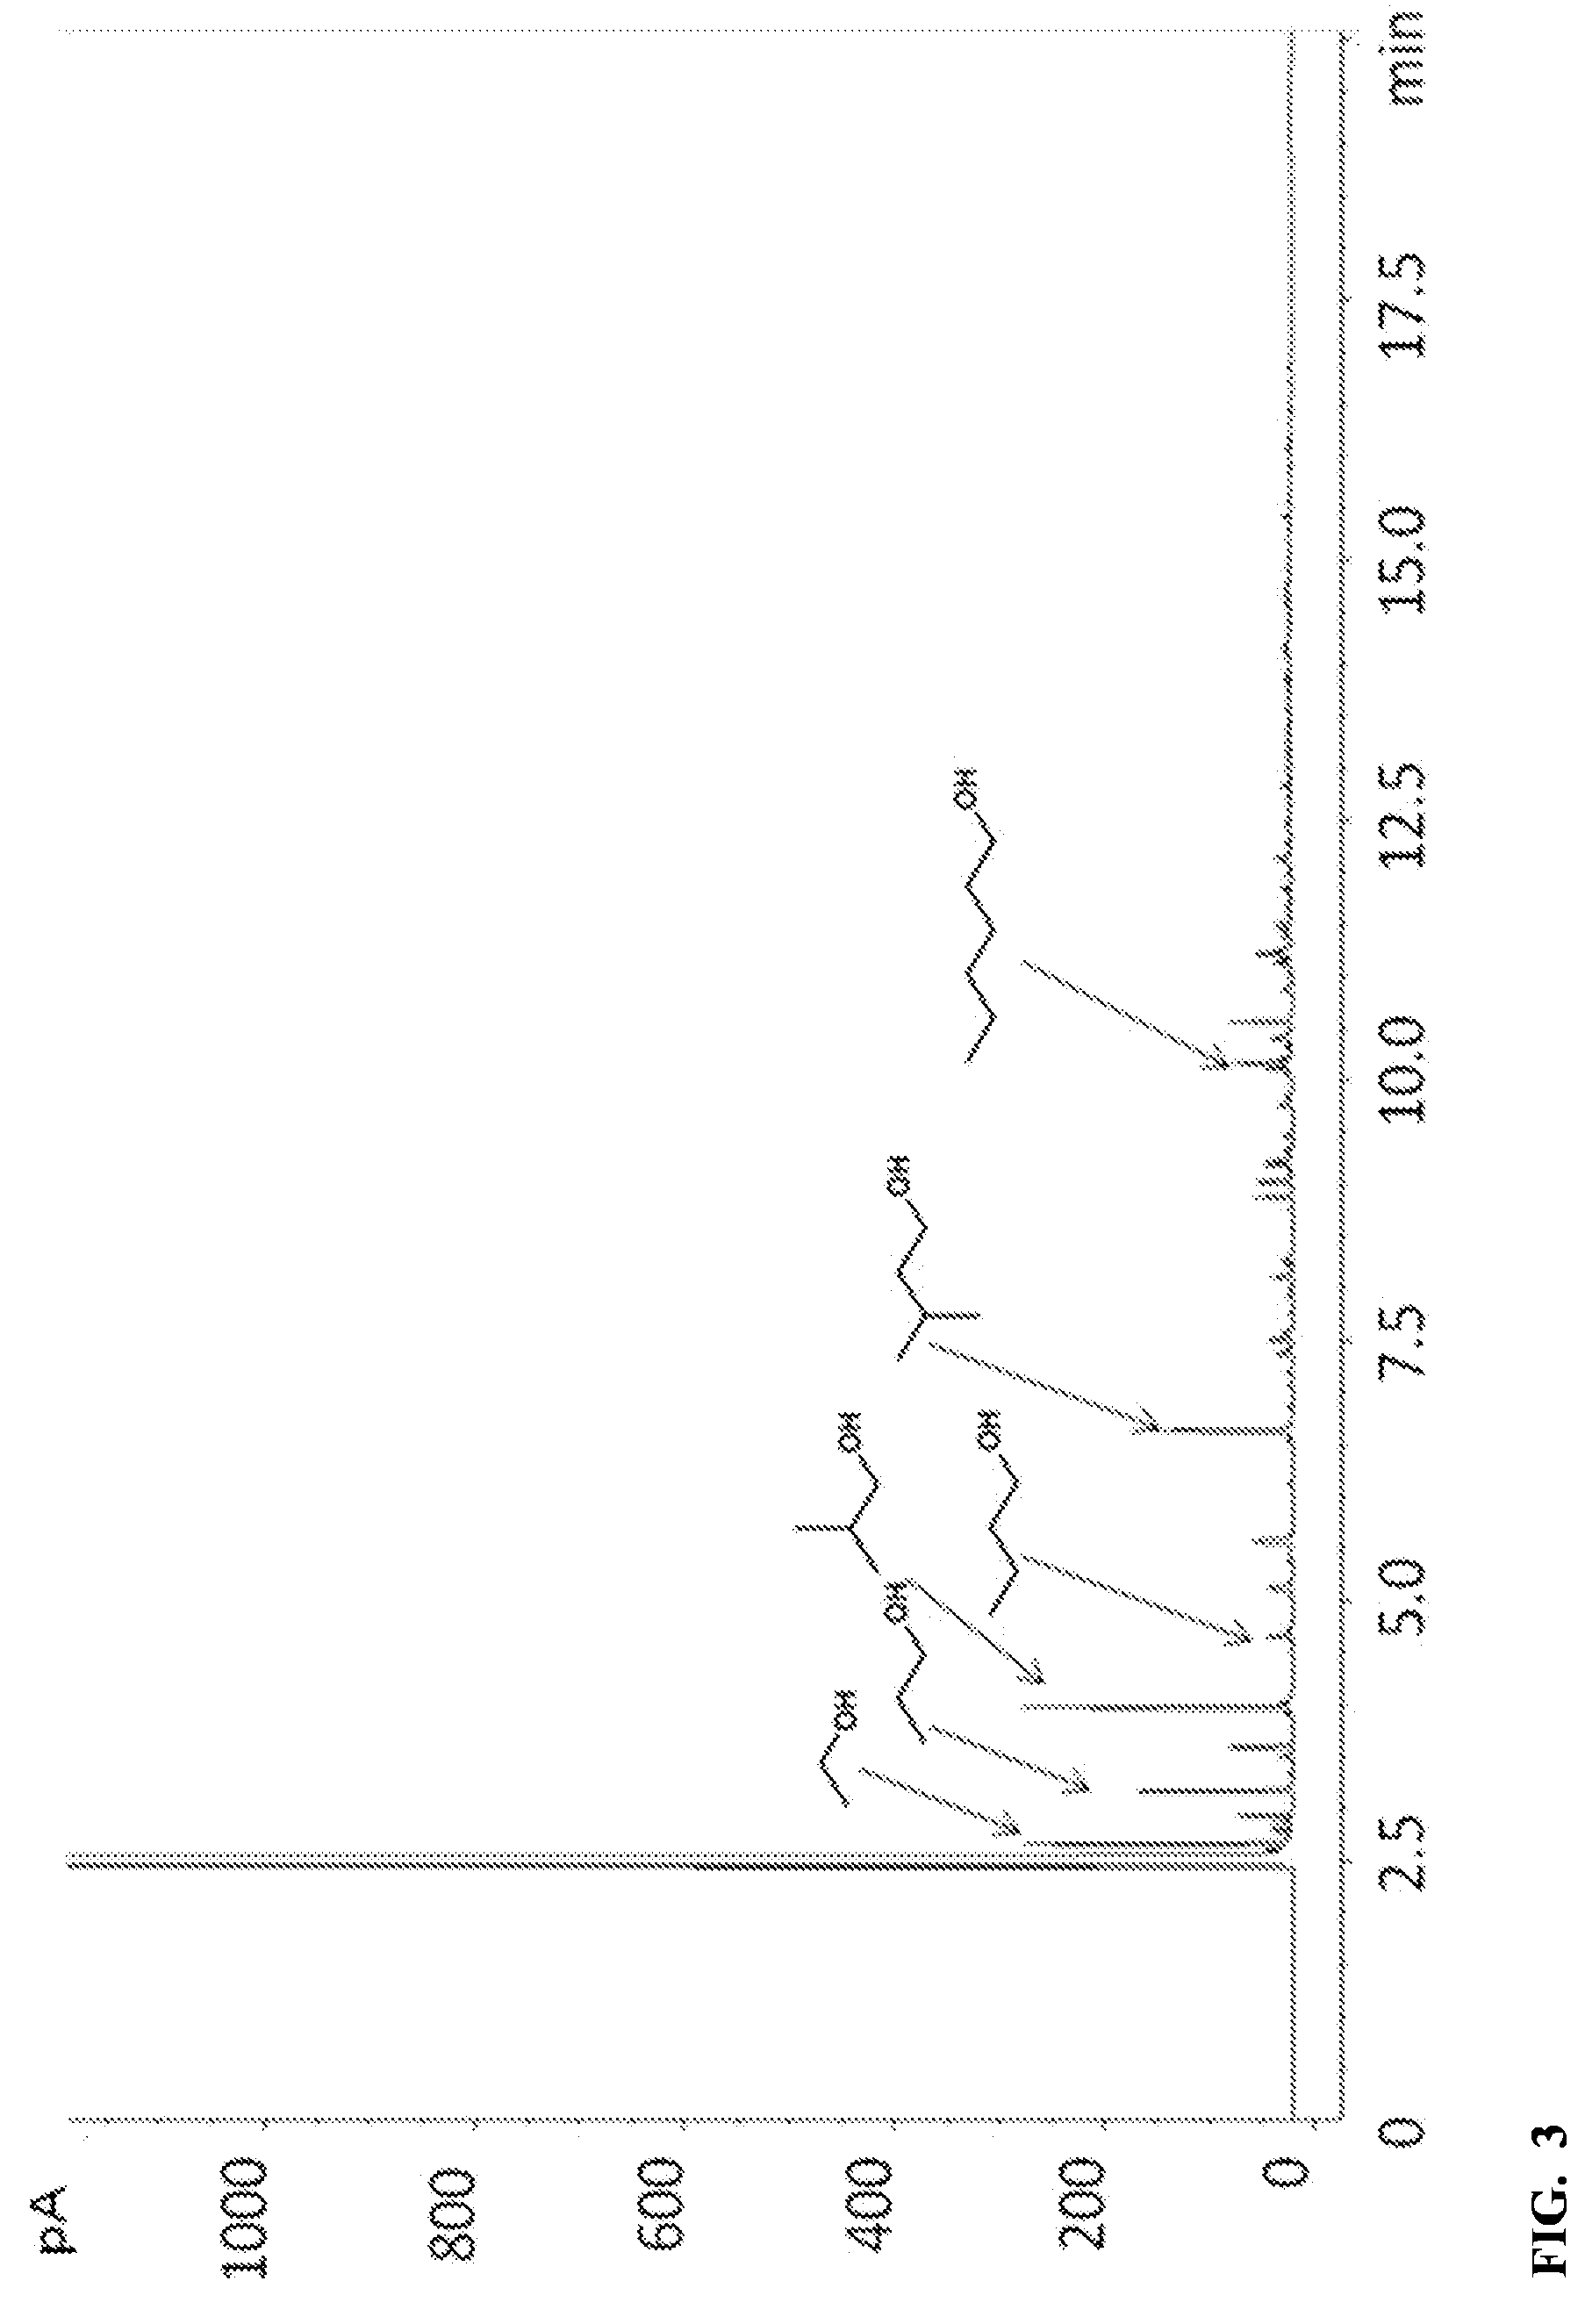 Process for direct conversion of biomass to liquid fuels and chemicals